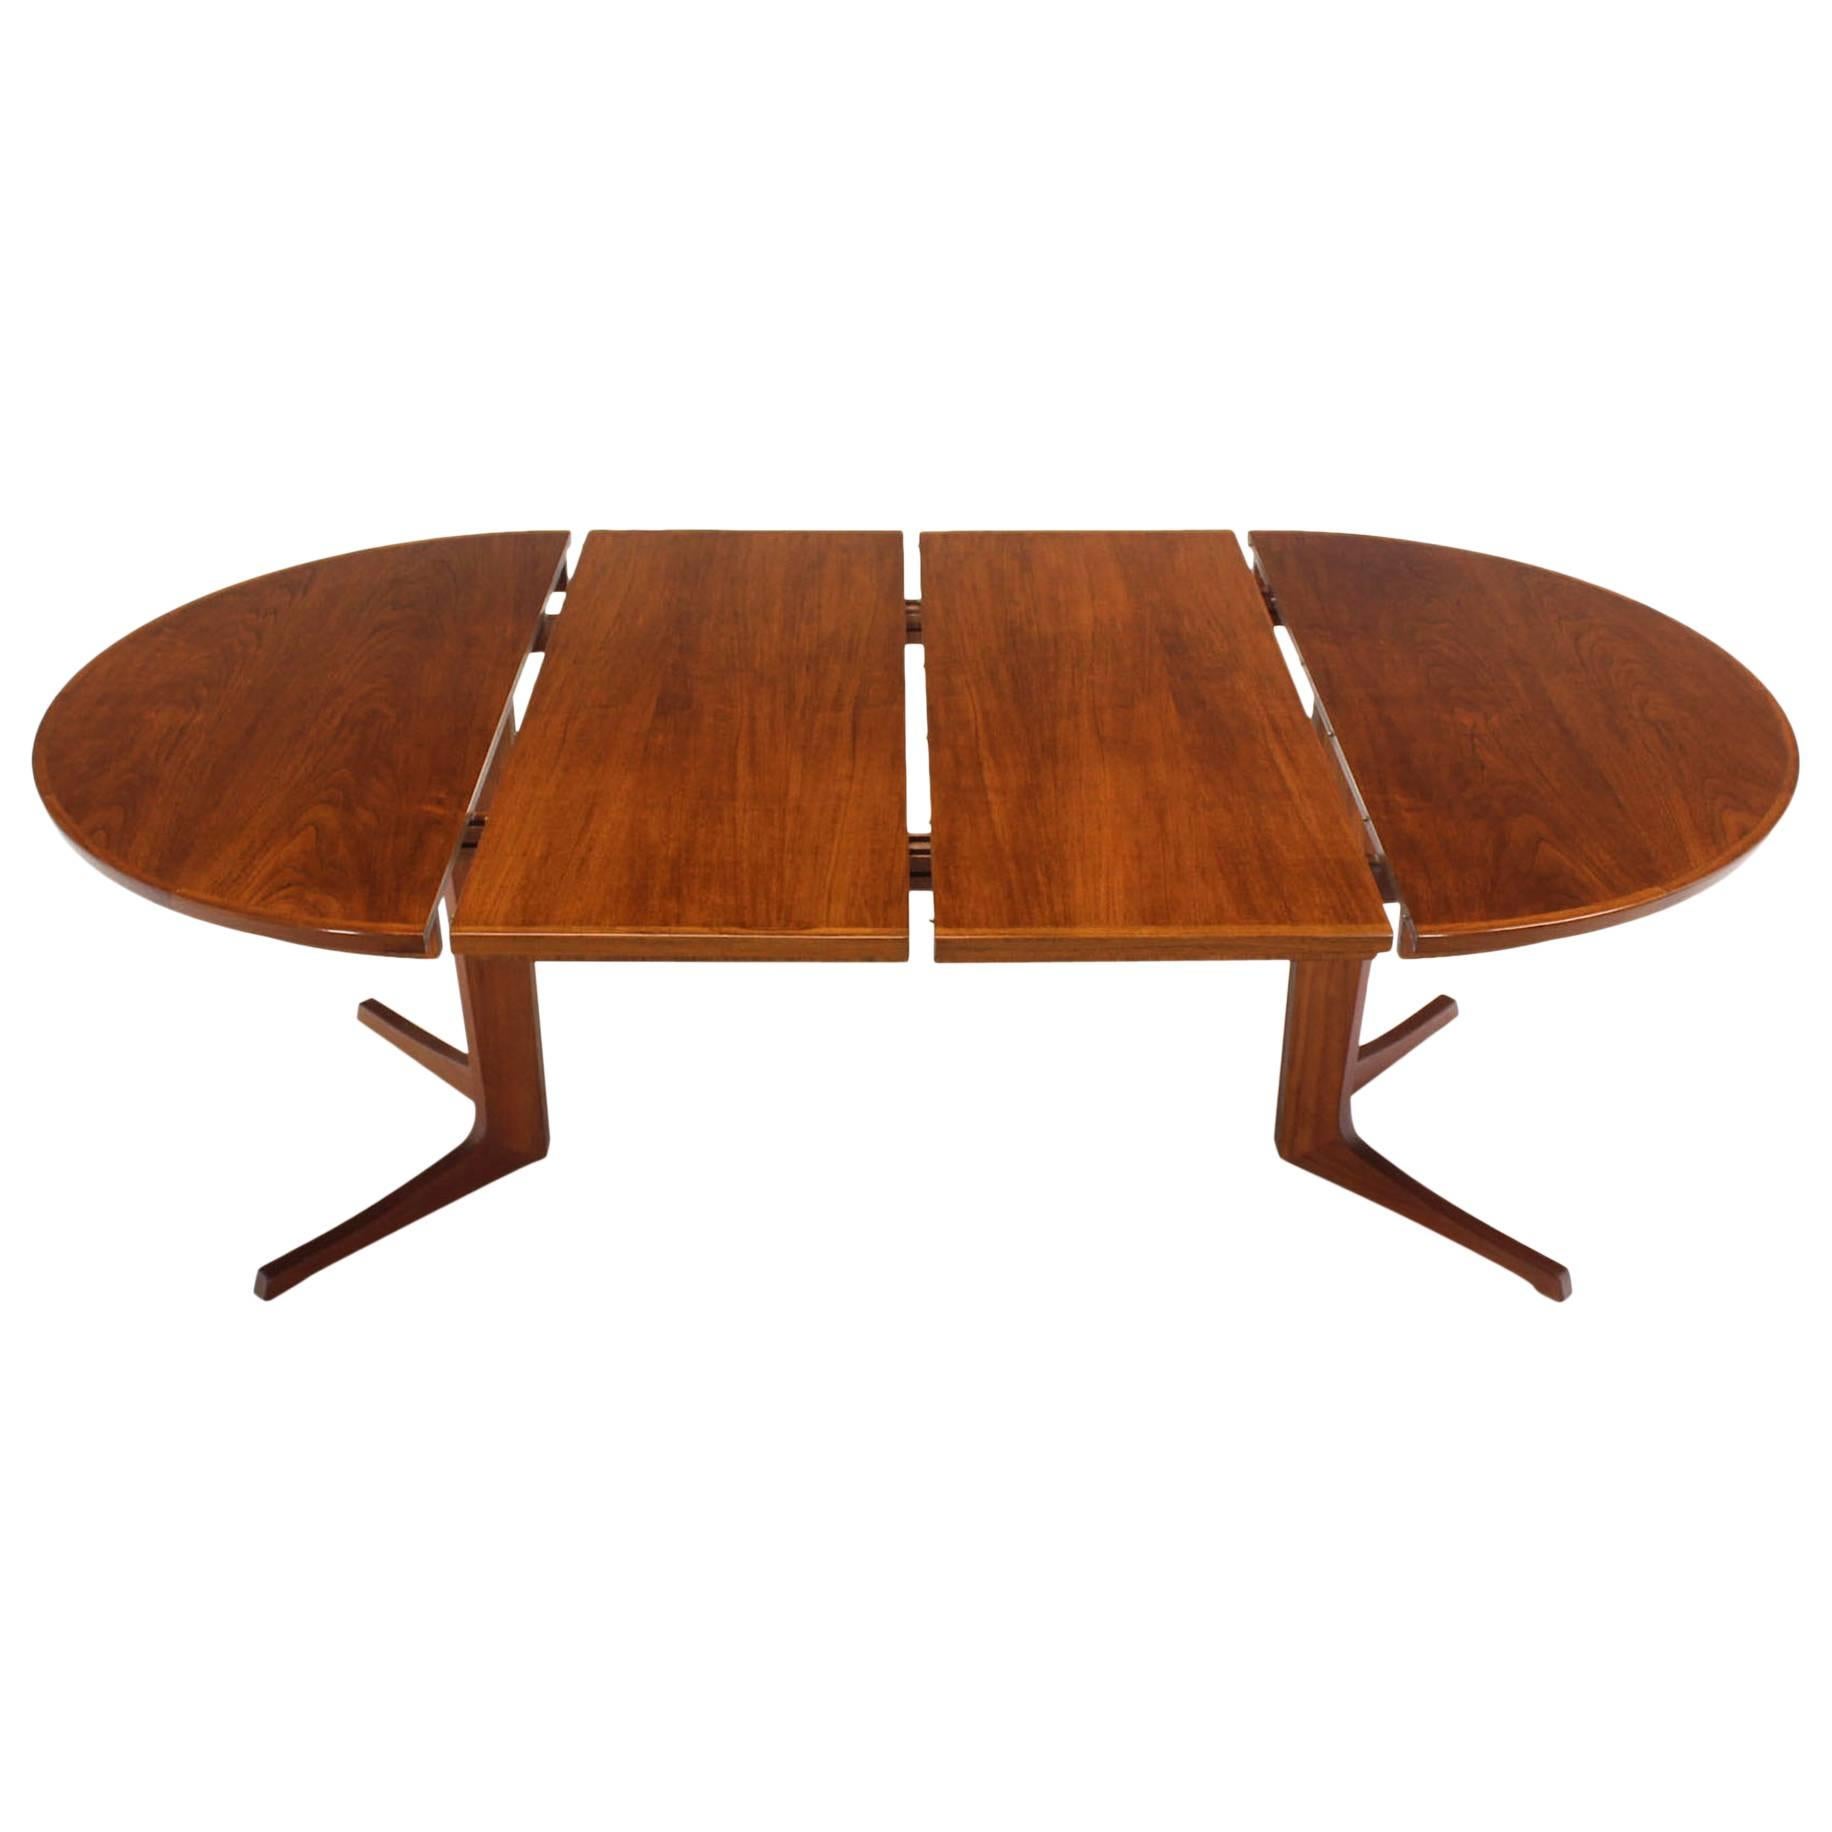 Round Danish Mid-Century Modern Teak Dining Table with Two Leaves